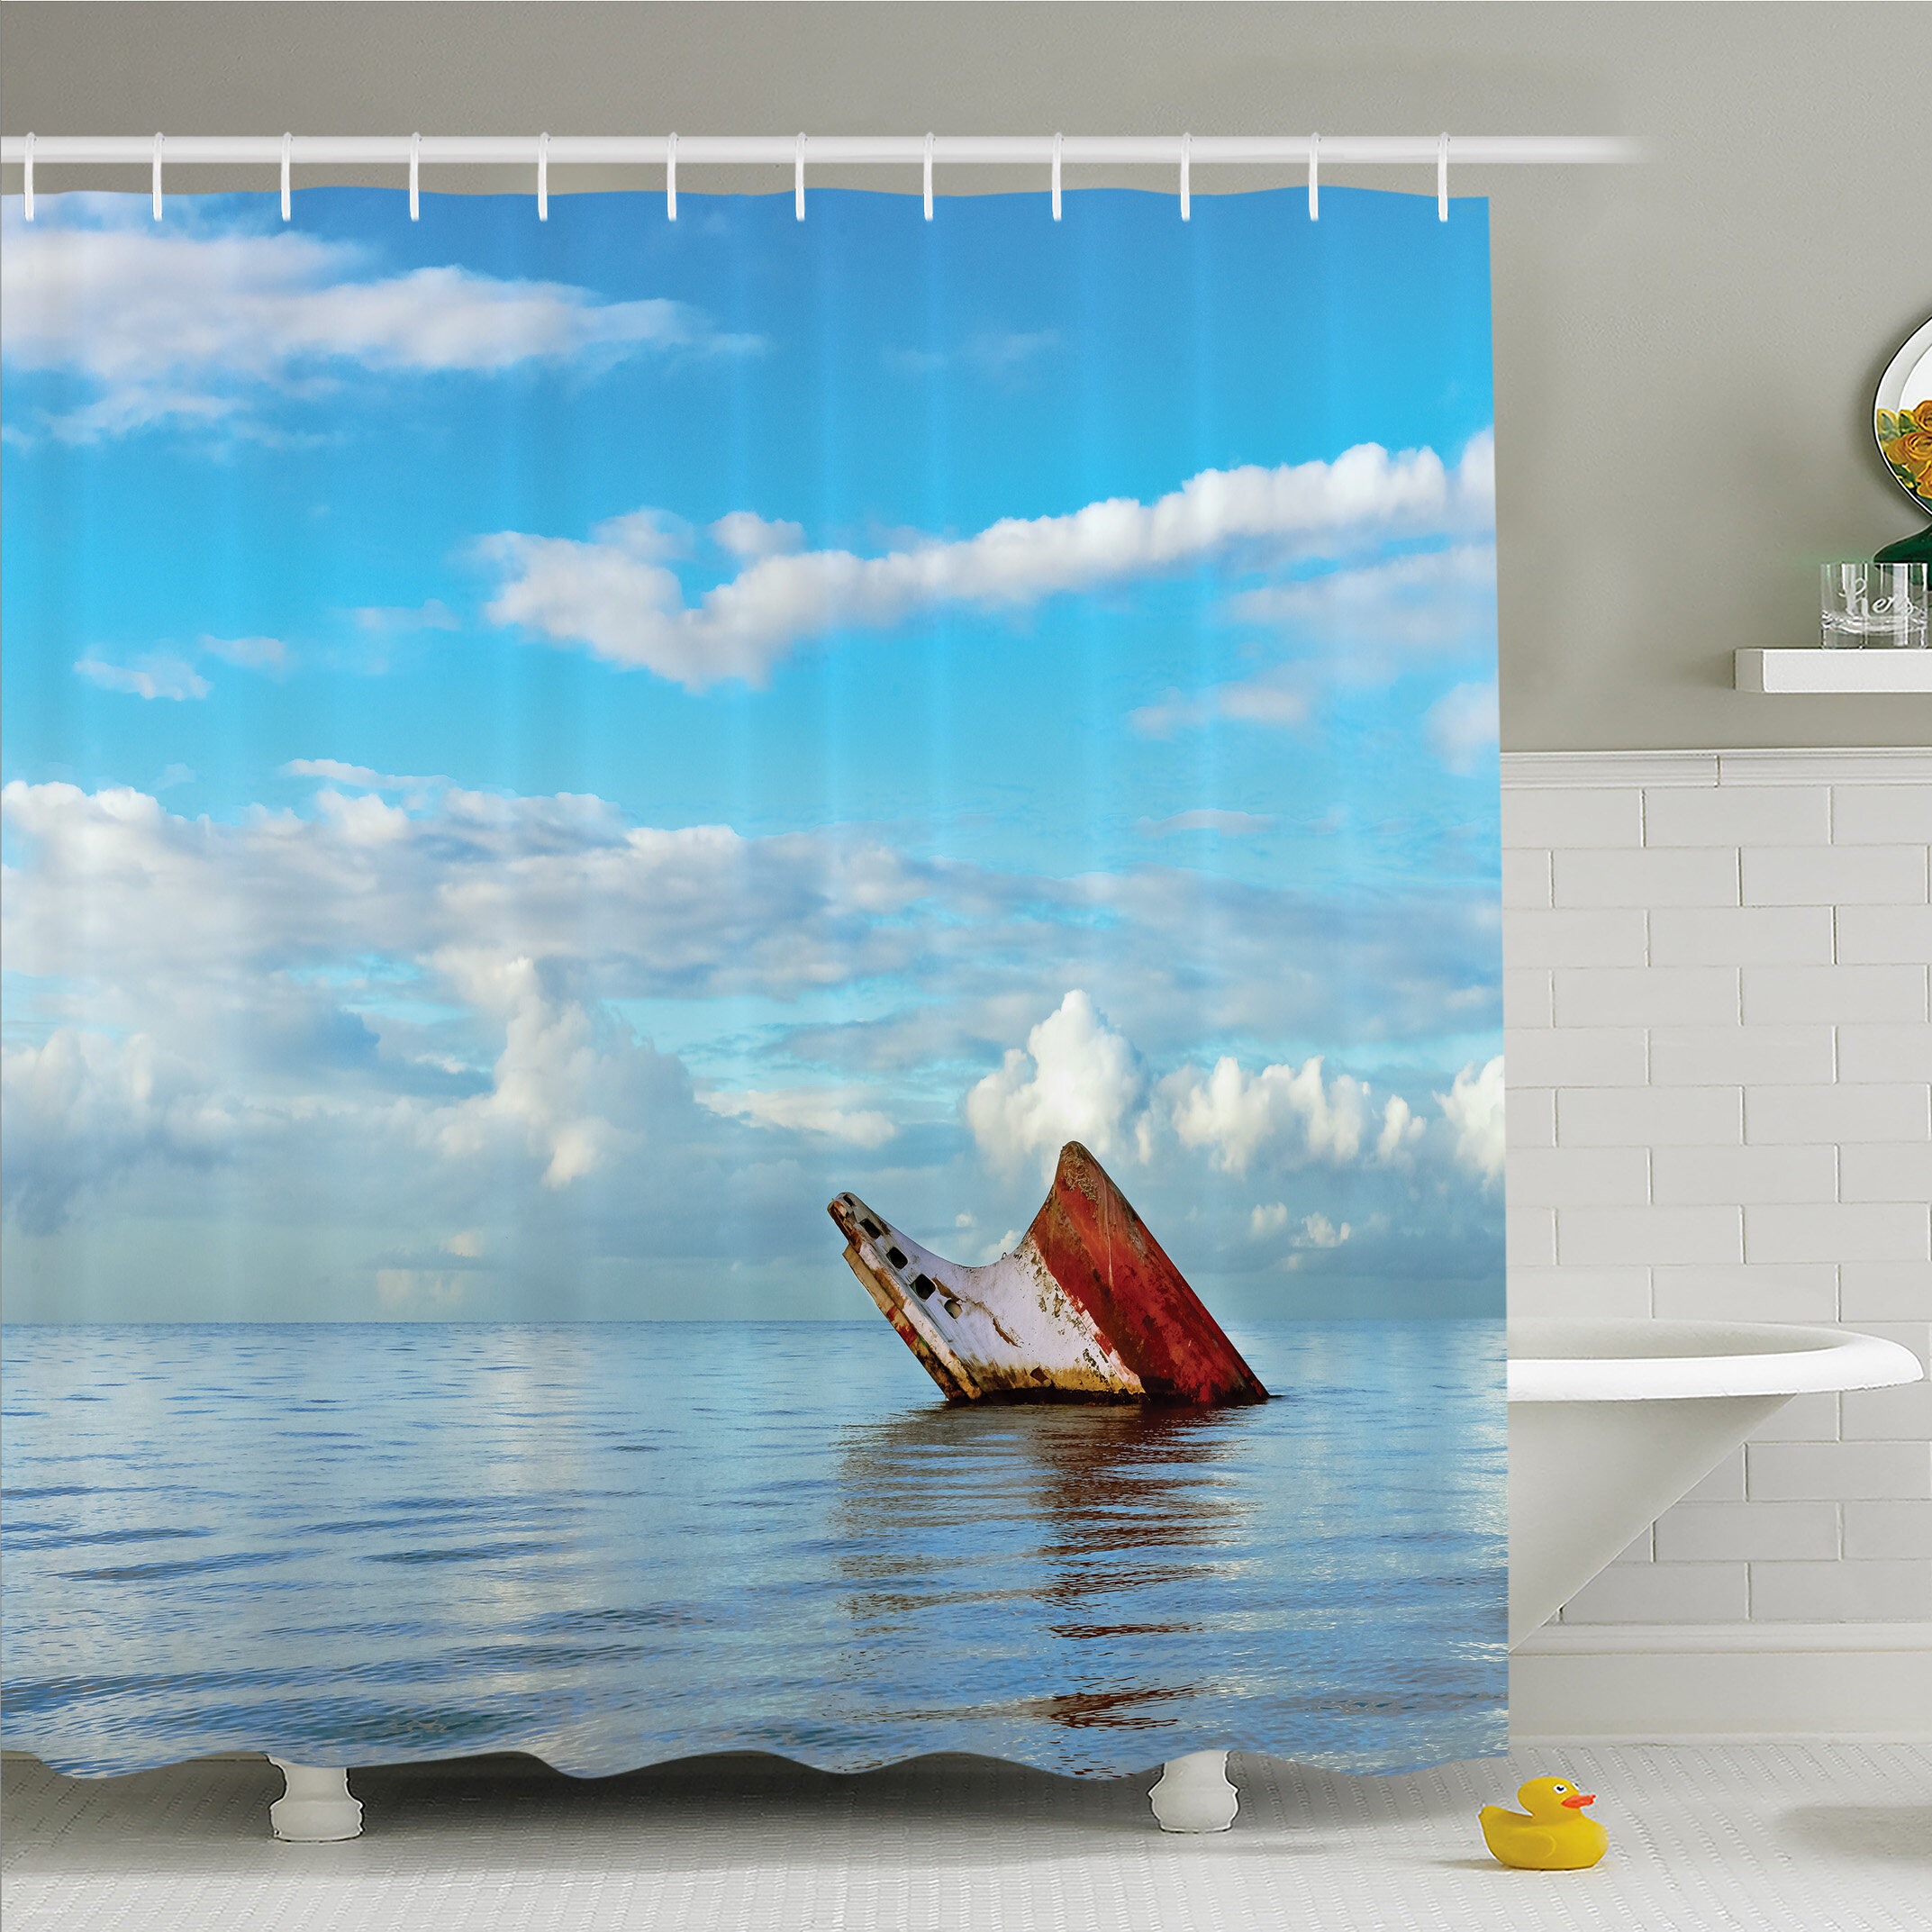 Ocean Sunken Ship On Surface Of Freshening Sea View With Cloudy Weather Nobody Print Shower Curtain Set